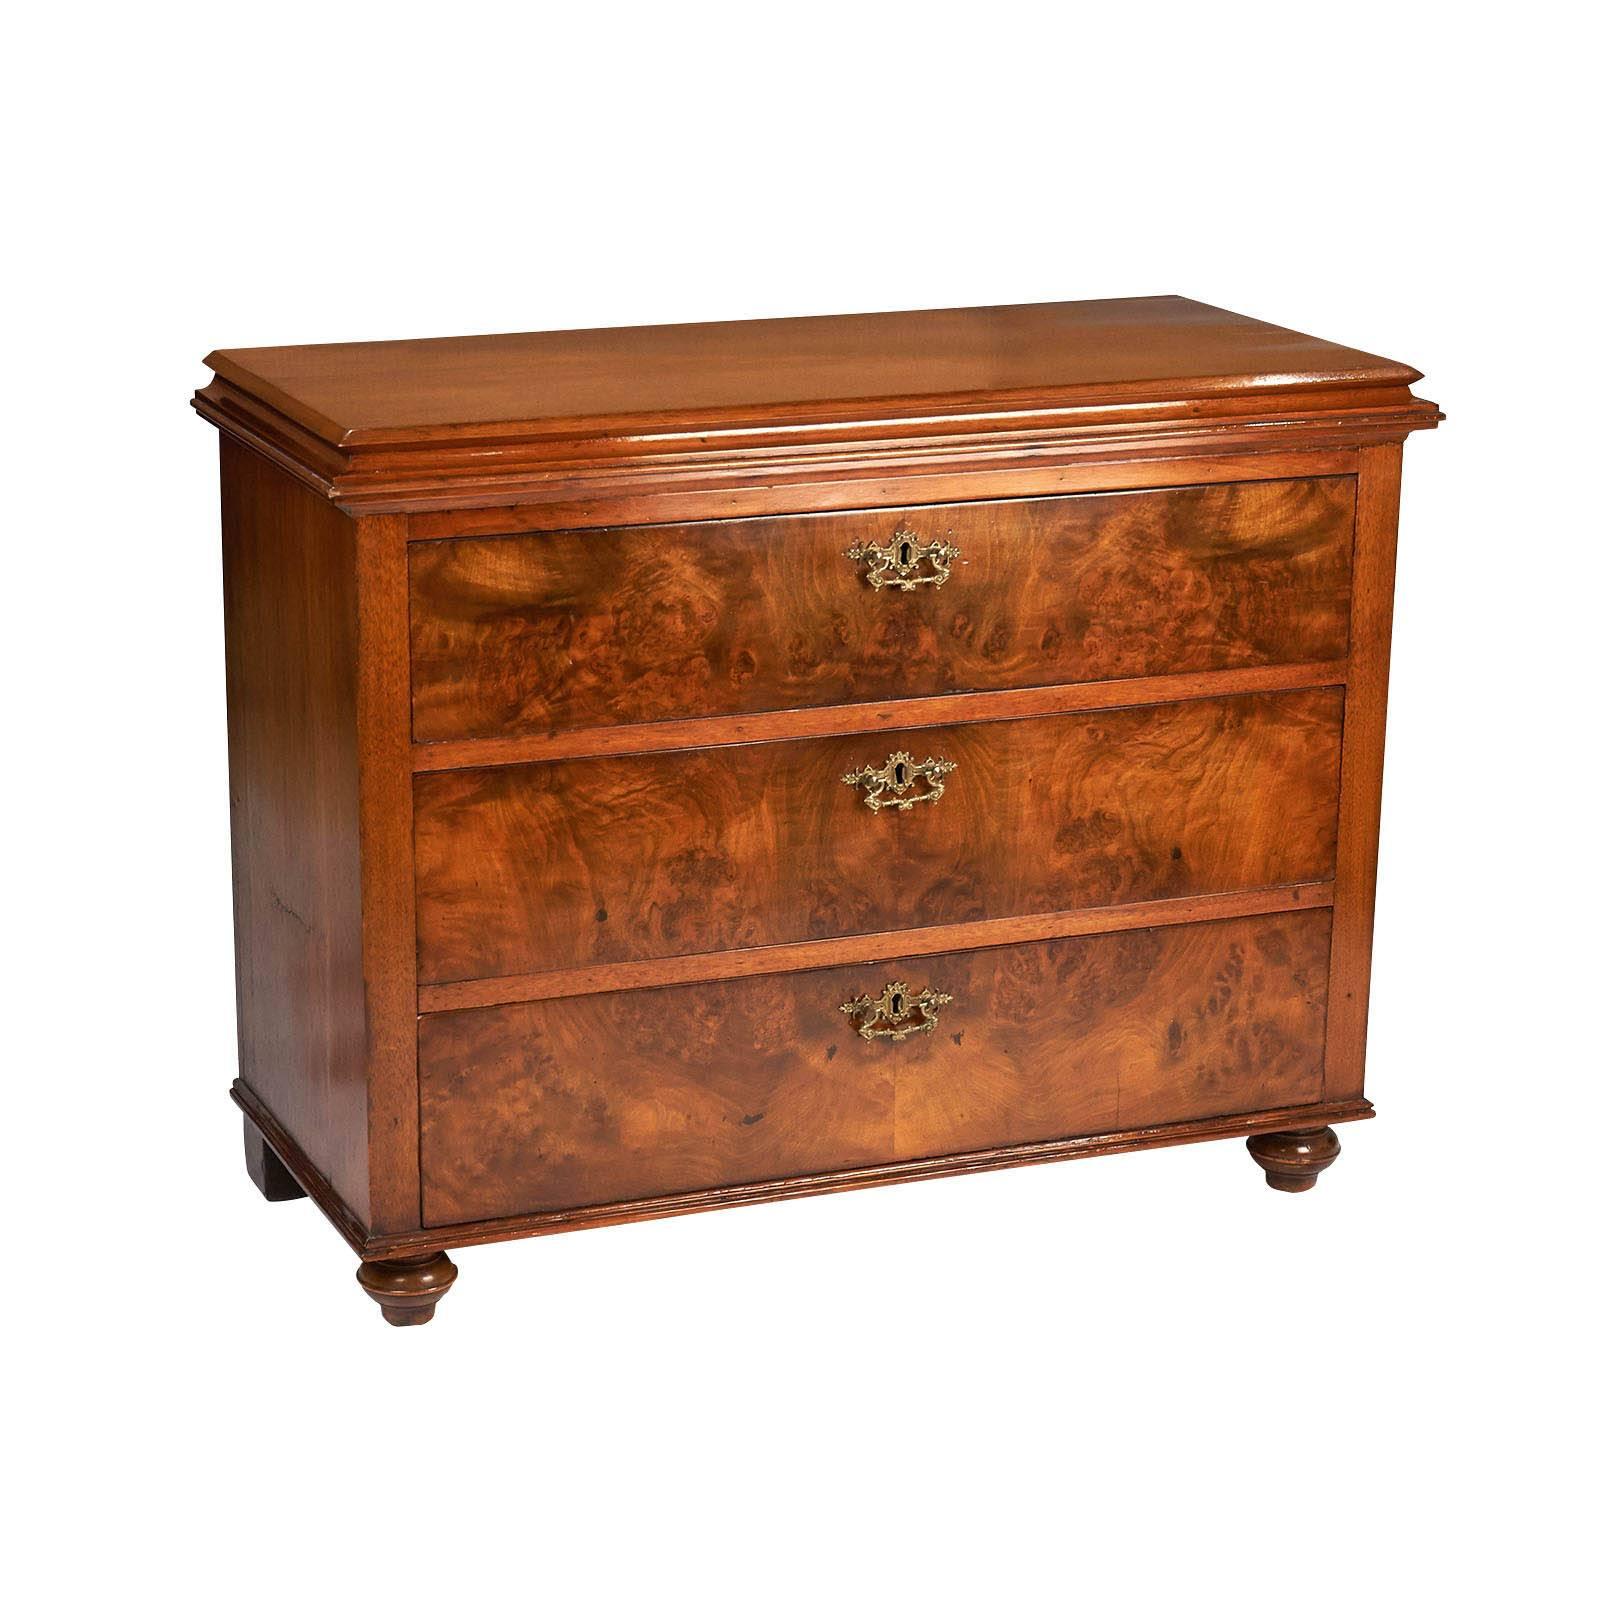 A well proportioned smaller scaled Swedish chest of drawers in Burled Elm, circa 1850. This pieces warm color and its size make it particularly useful as a bed side chest etc. Recently tightened and polished.